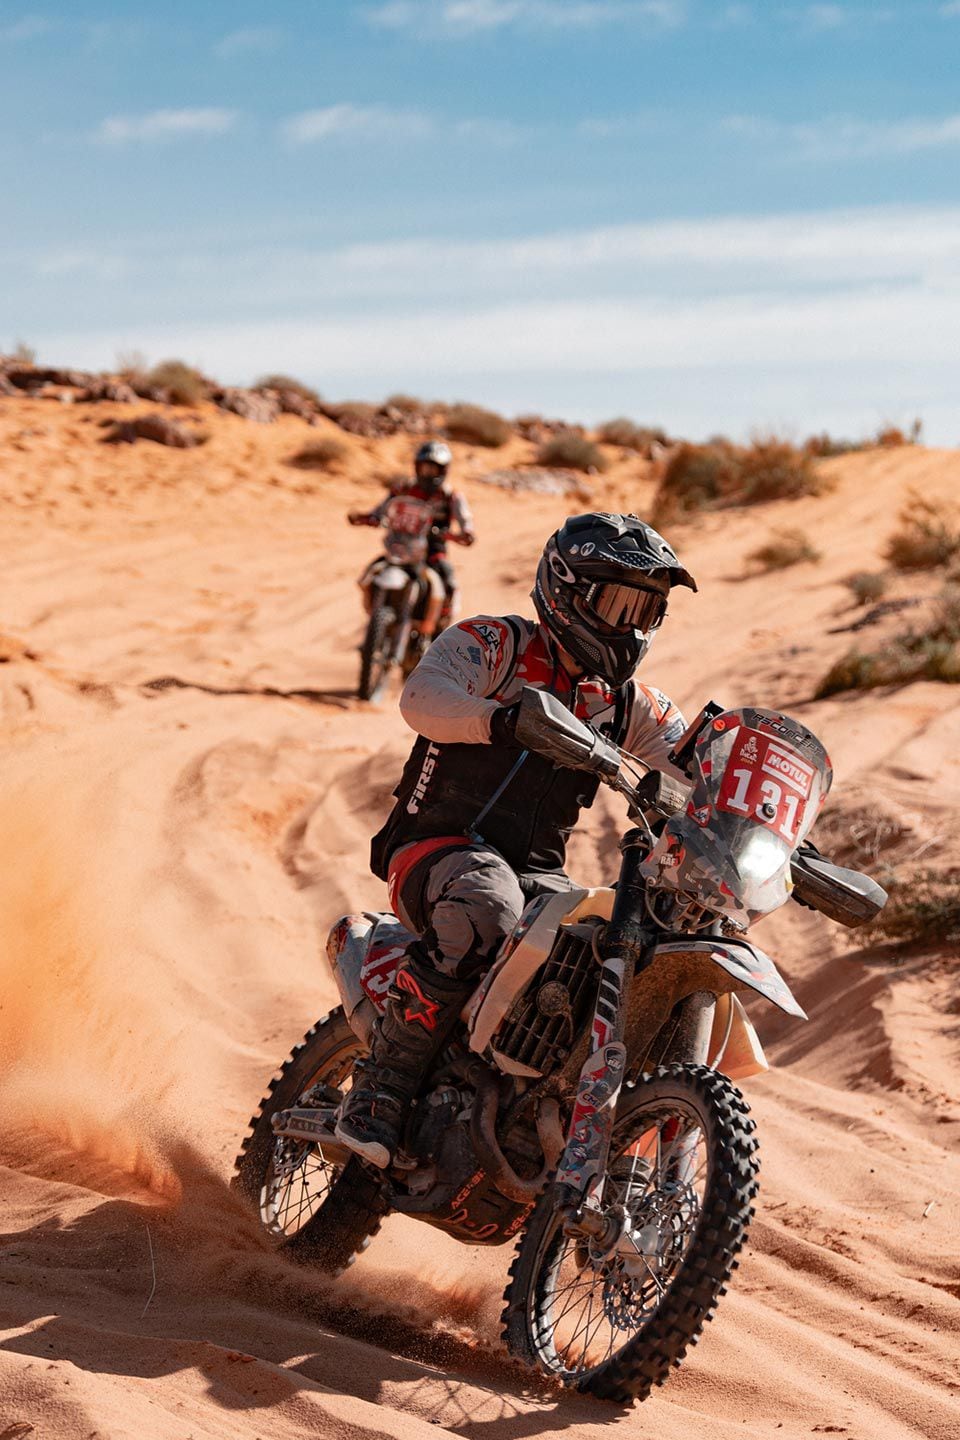 Anthony Fabre, of Team ARF, guides his KTM through the powdered sand of Stage 9.